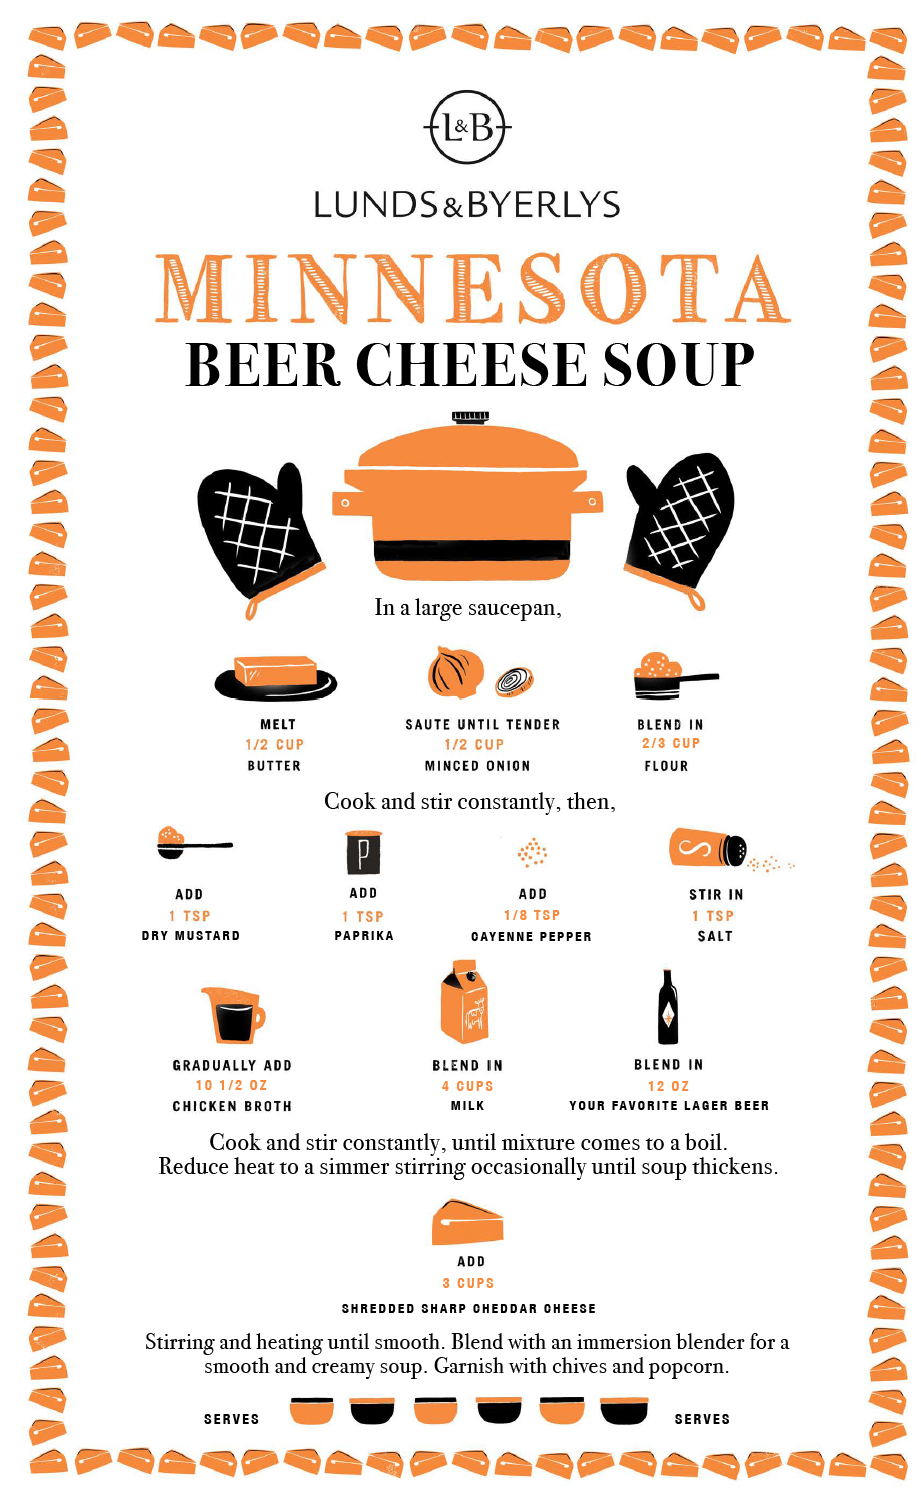 L&B Beer Cheese Soup Recipe Towel - Lunds & Byerlys Gifts